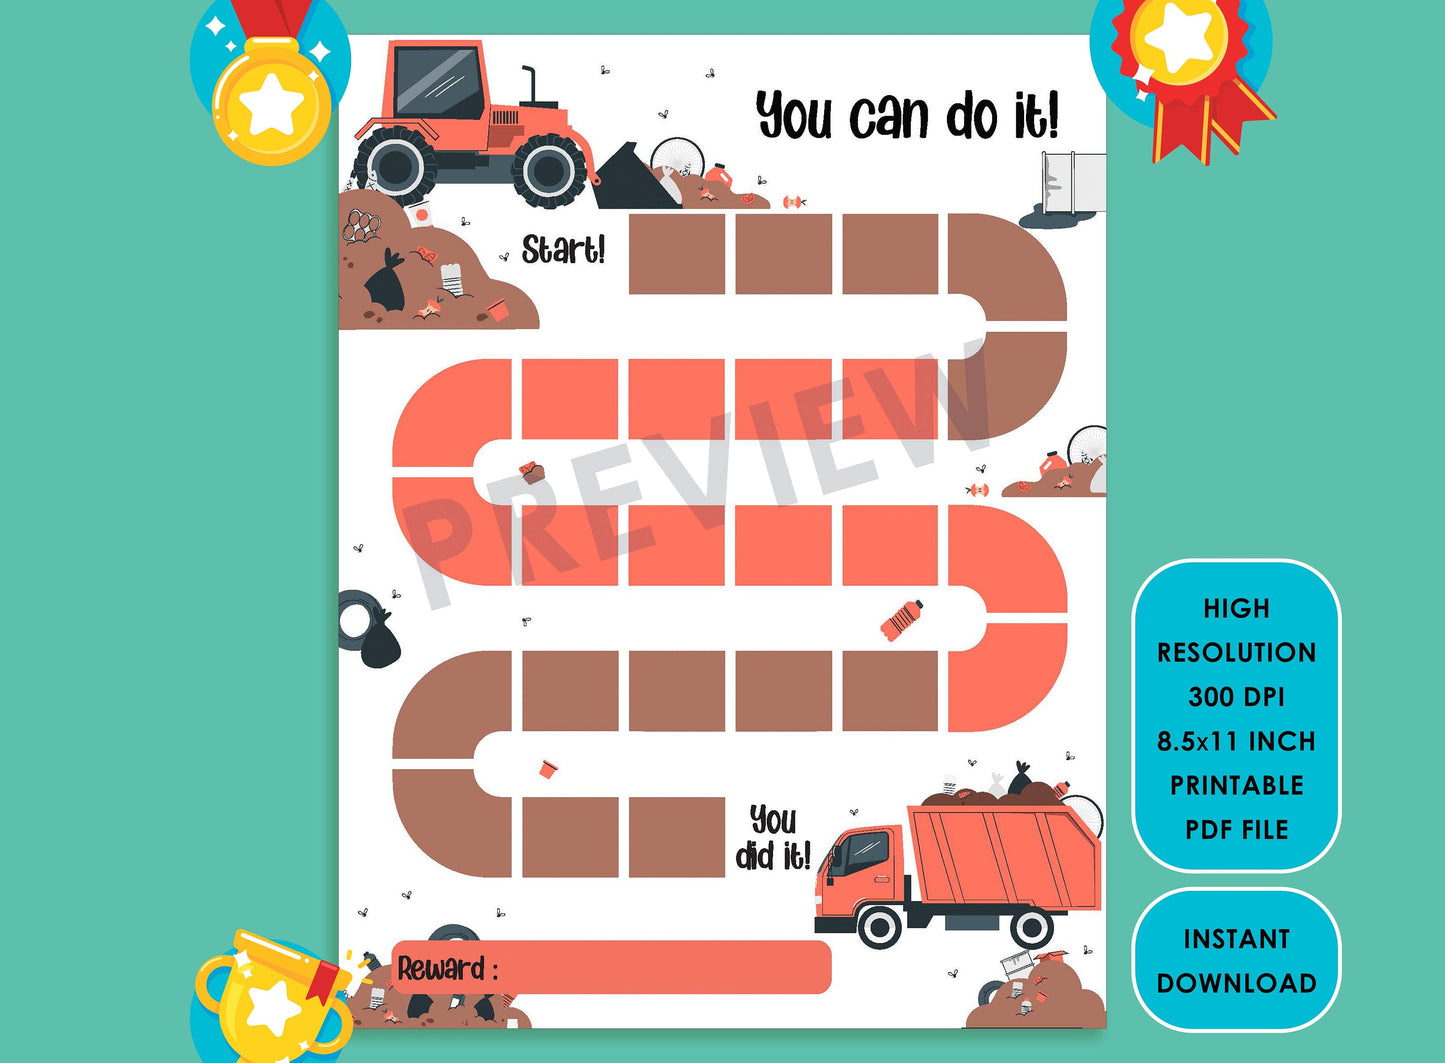 Printable Garbage Truck Reward Chart, Working garbage truck, Get your kids organized with their housework with this chore chart.